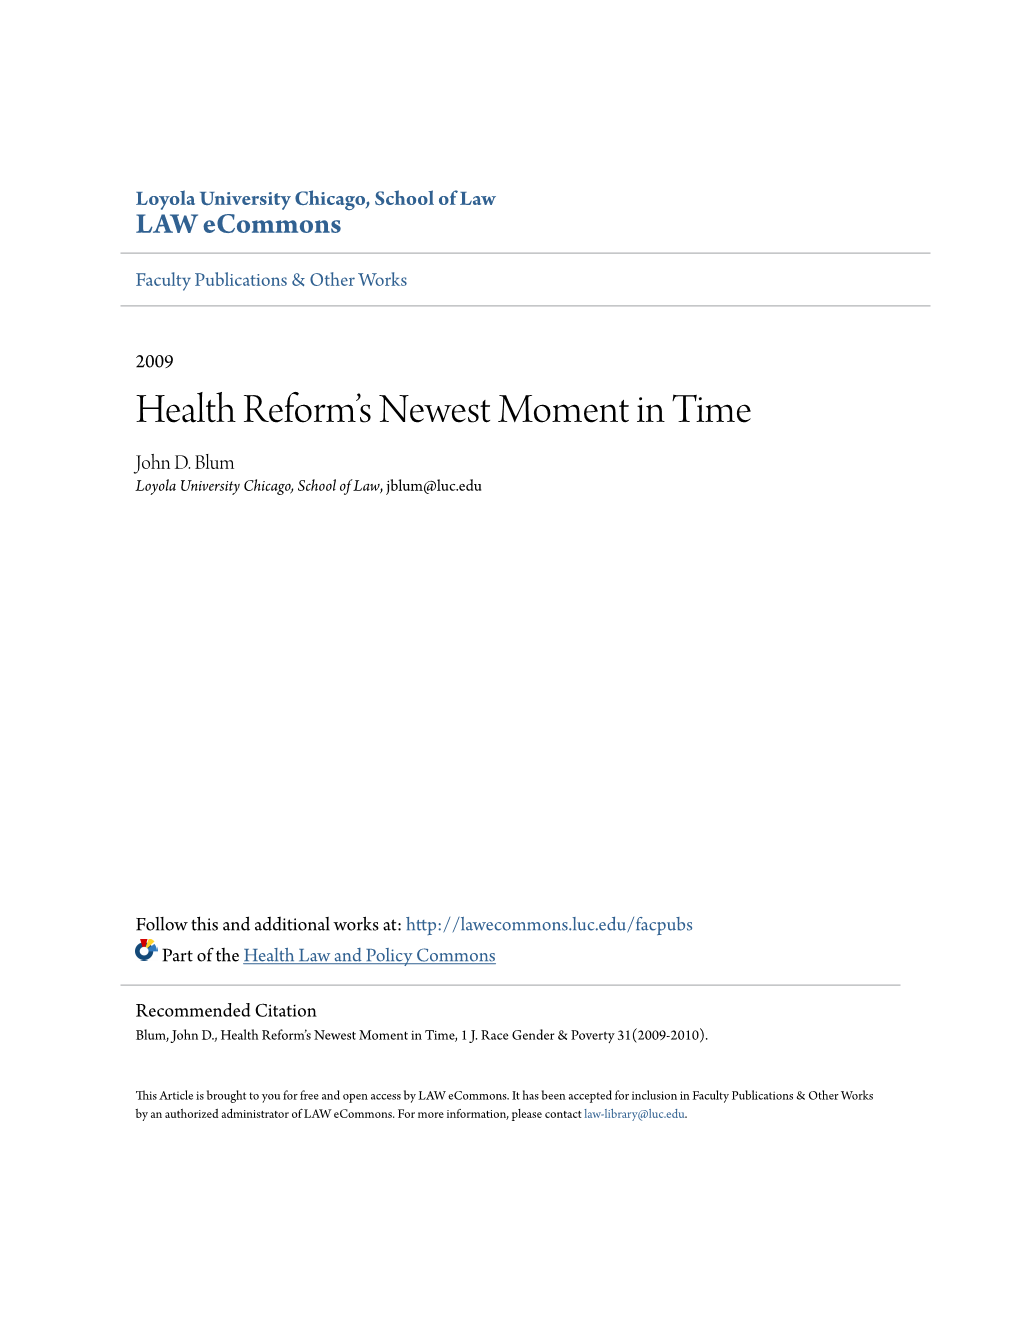 Health Reform's Newest Moment in Time